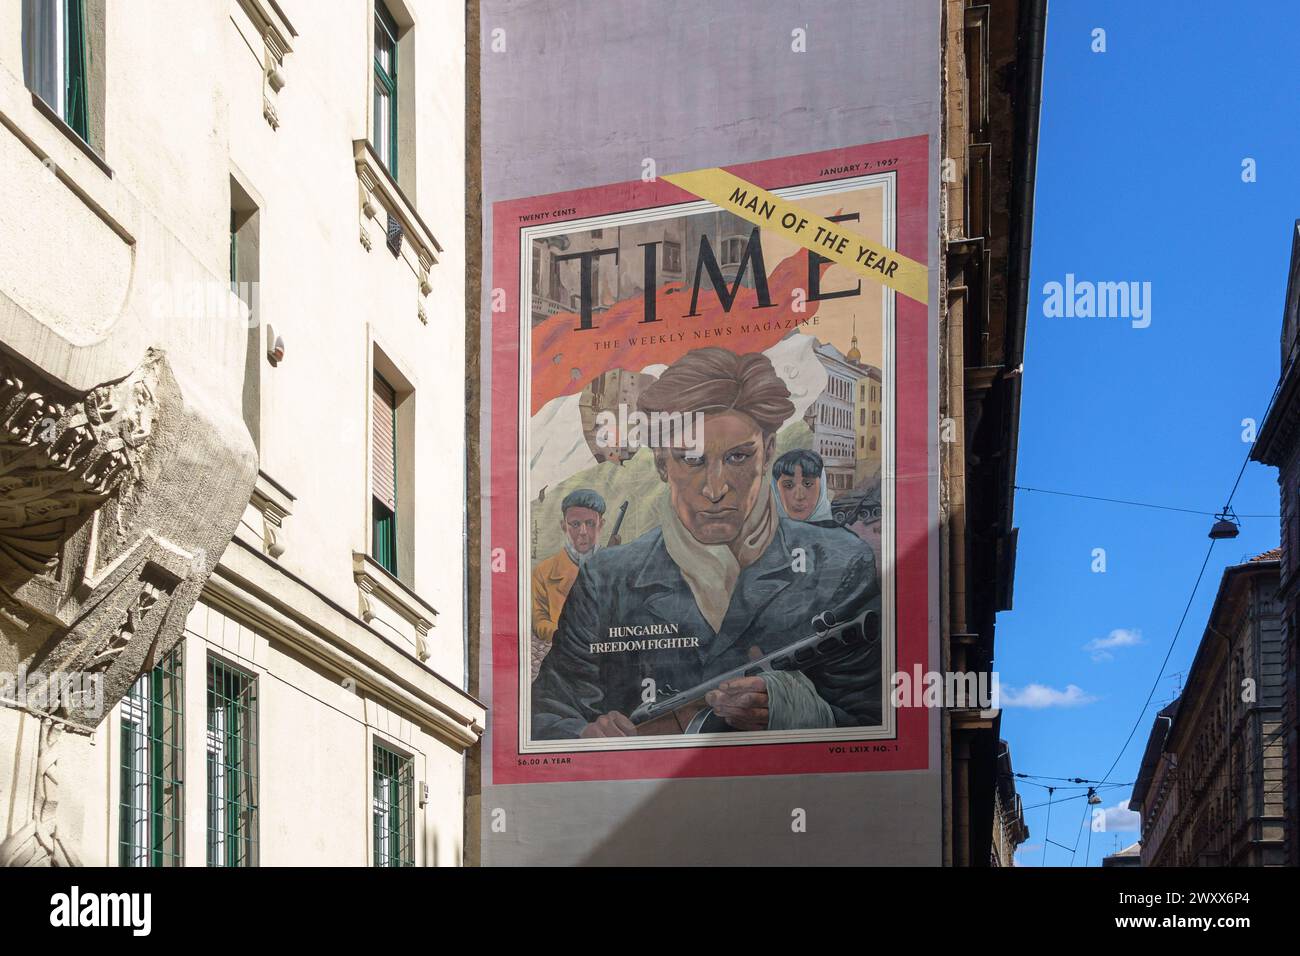 A mural depicting the 1957 Time Man of the Year cover with the Hungarian Freedom Fighter in Budapest Stock Photo